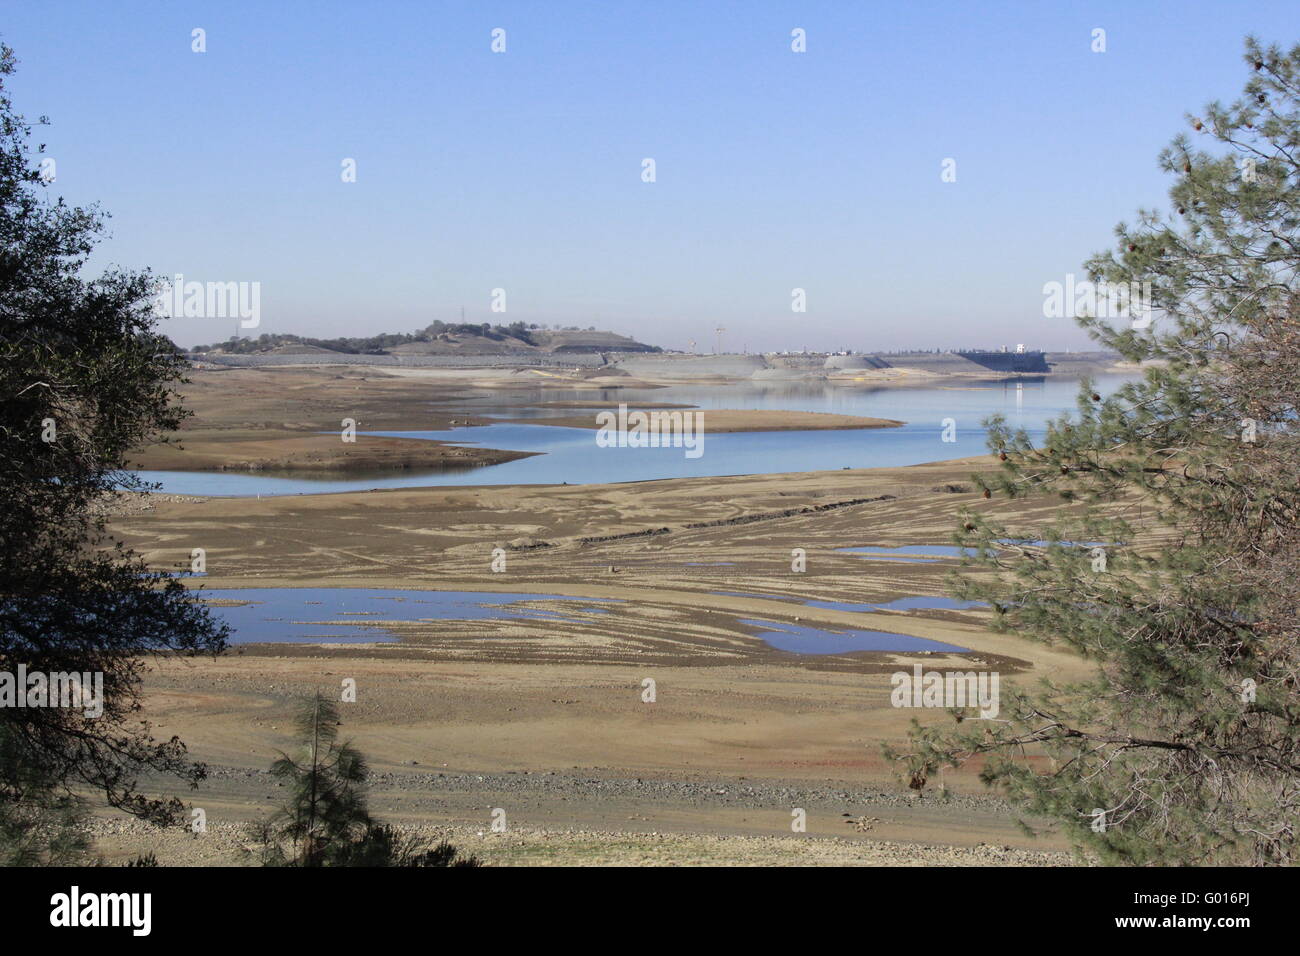 The long ago flooded town of Mormon Island, usually at the bottom of Folsom Lake, has made a reappearance. Stock Photo